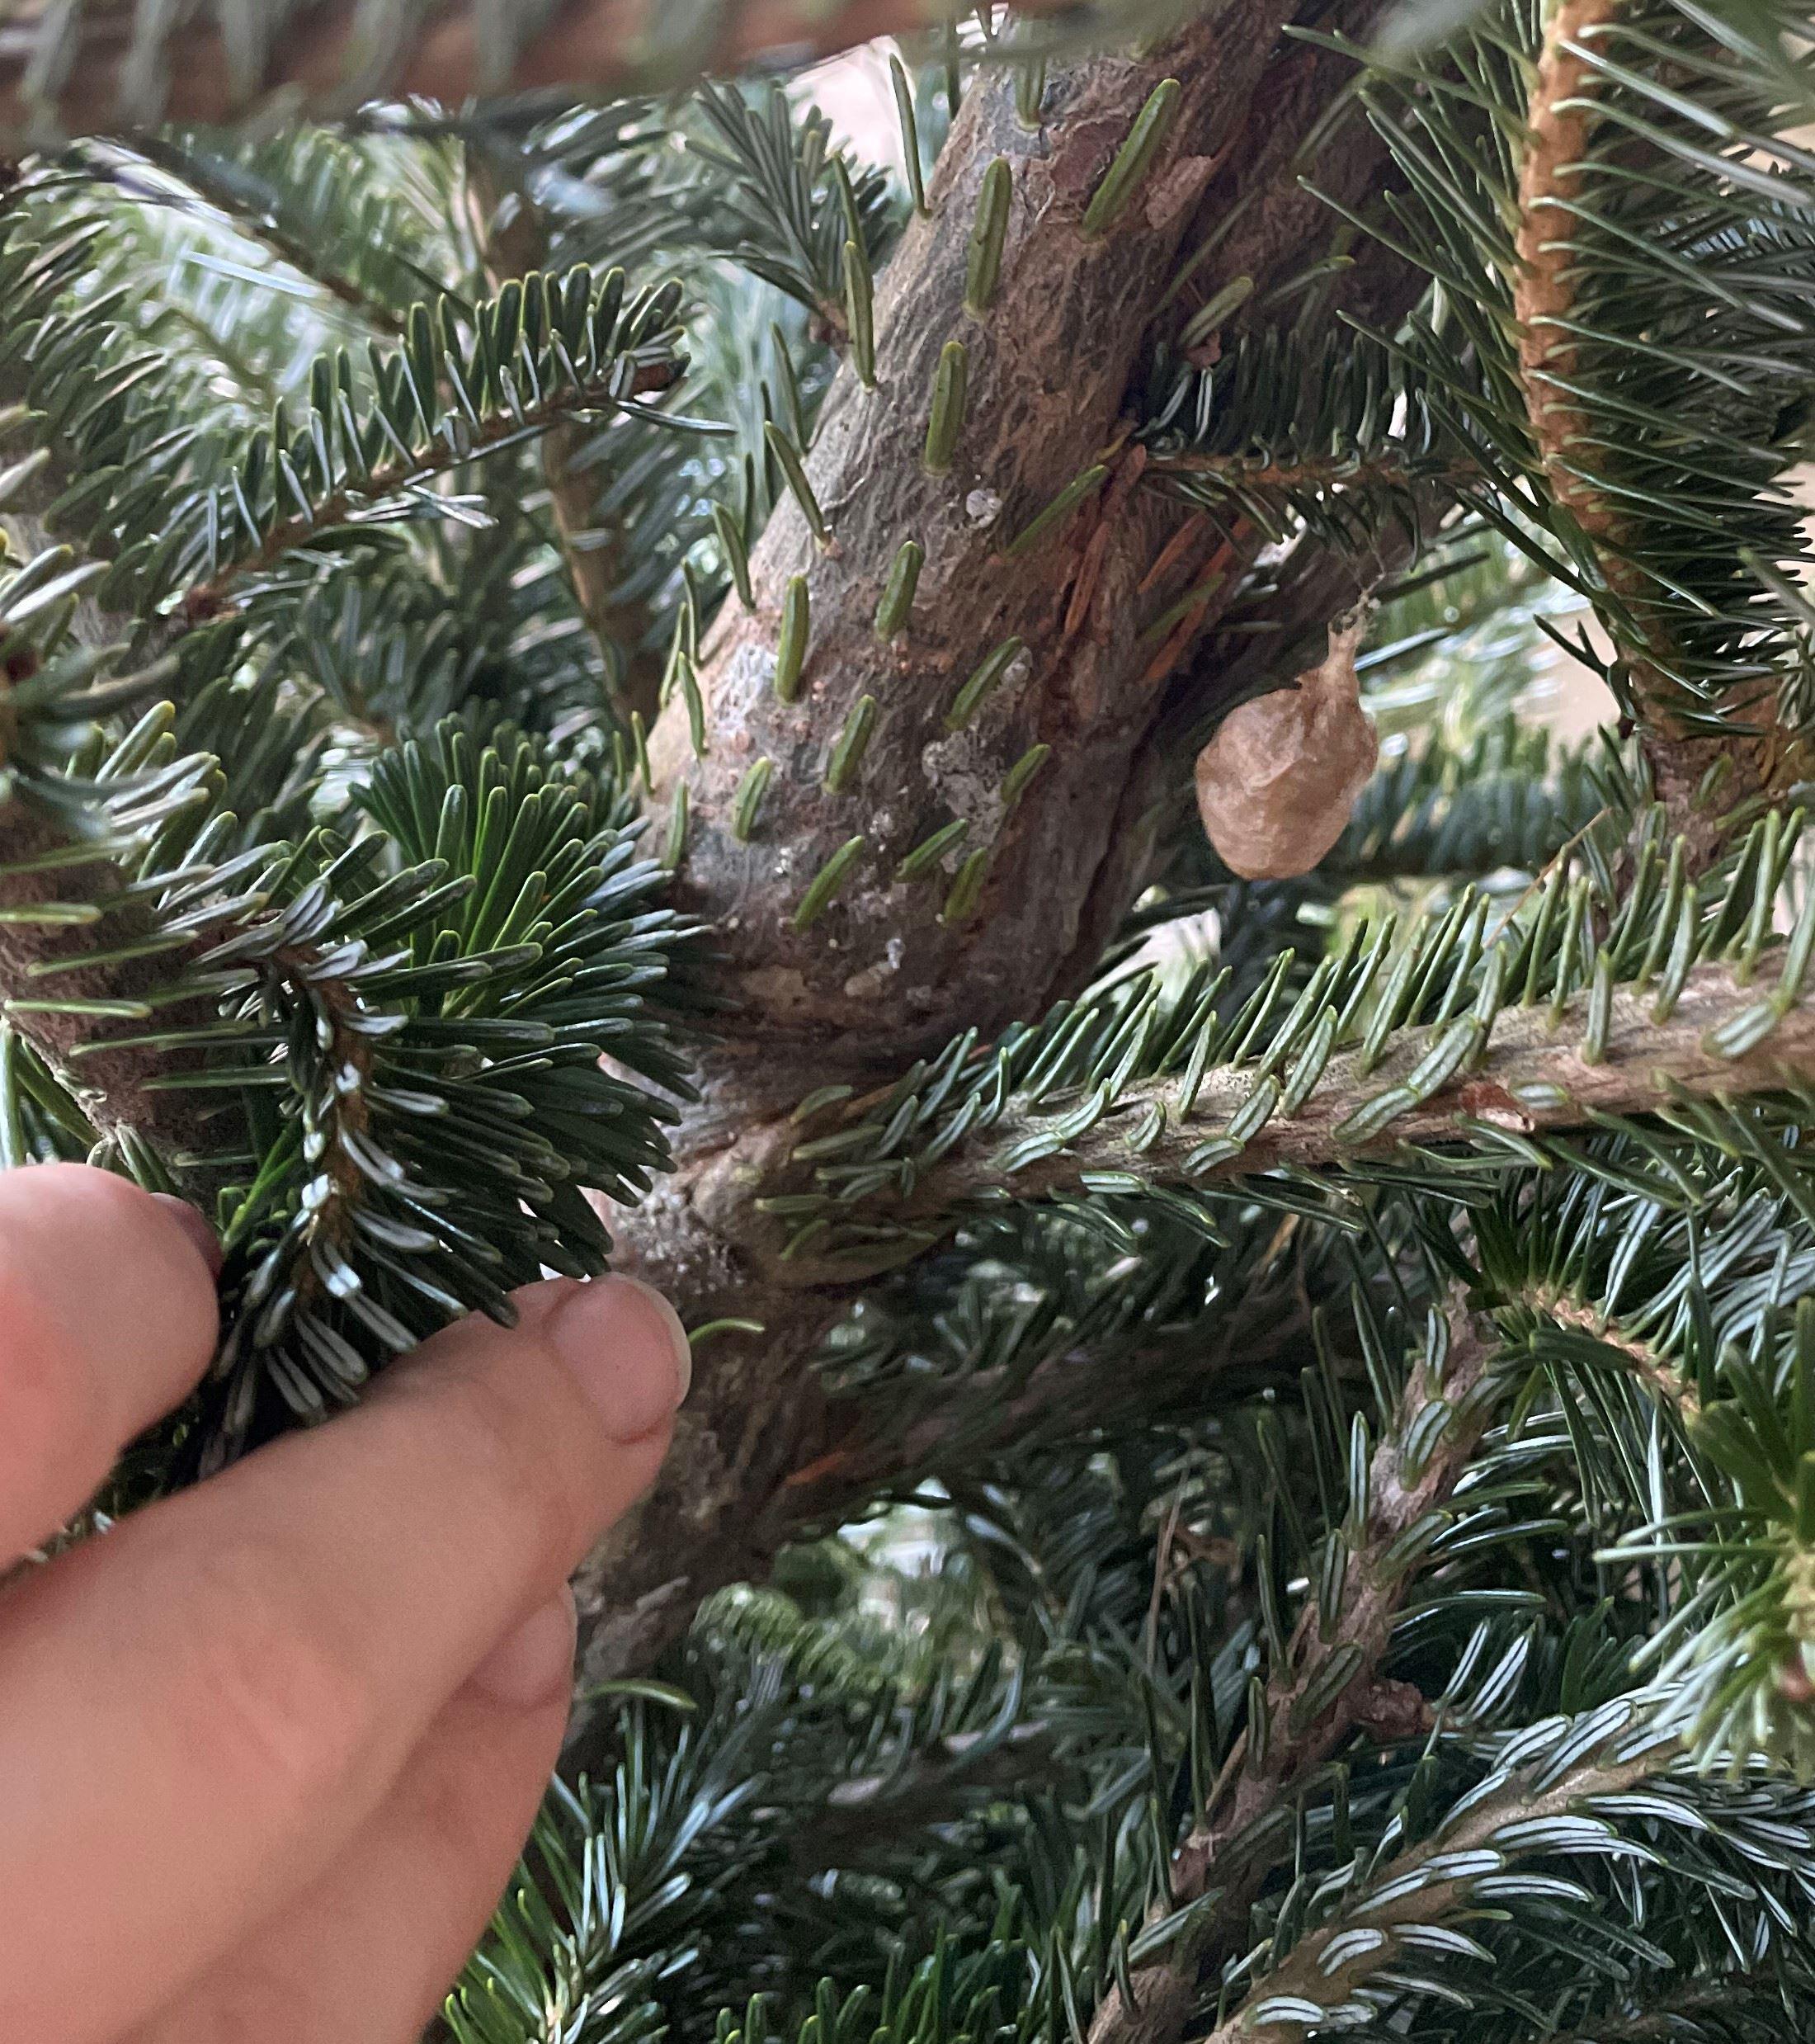 Photo of an insect's nest within a Christmas tree submitted by an actual Mosquito Squad employee (thus inspiring this blog).